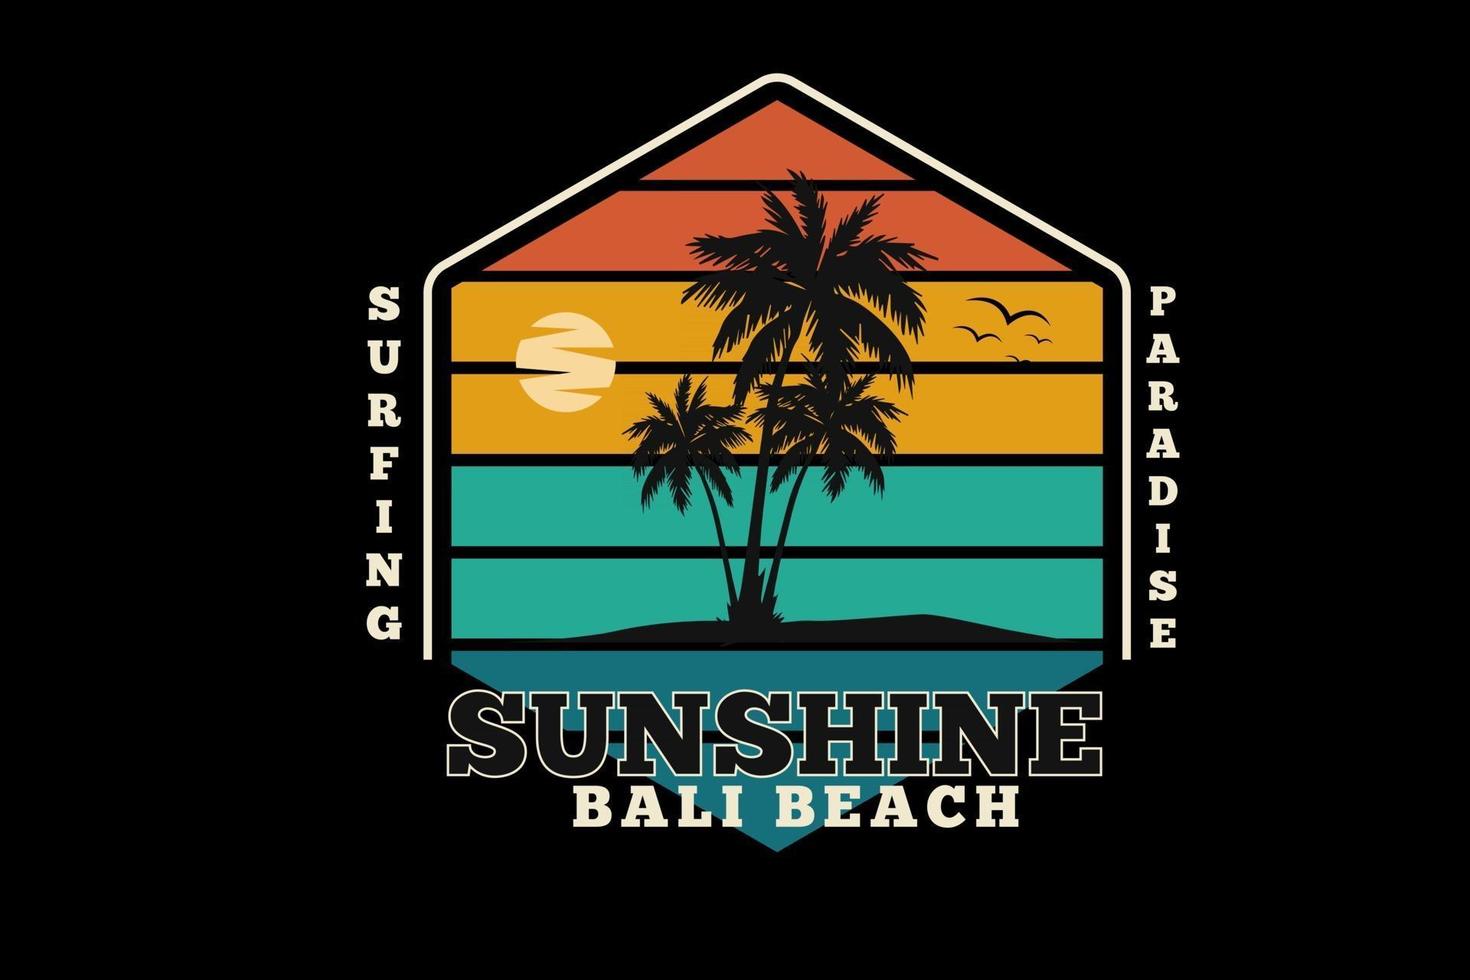 surfing paradise sunshine bali beach color green orange and yellow vector